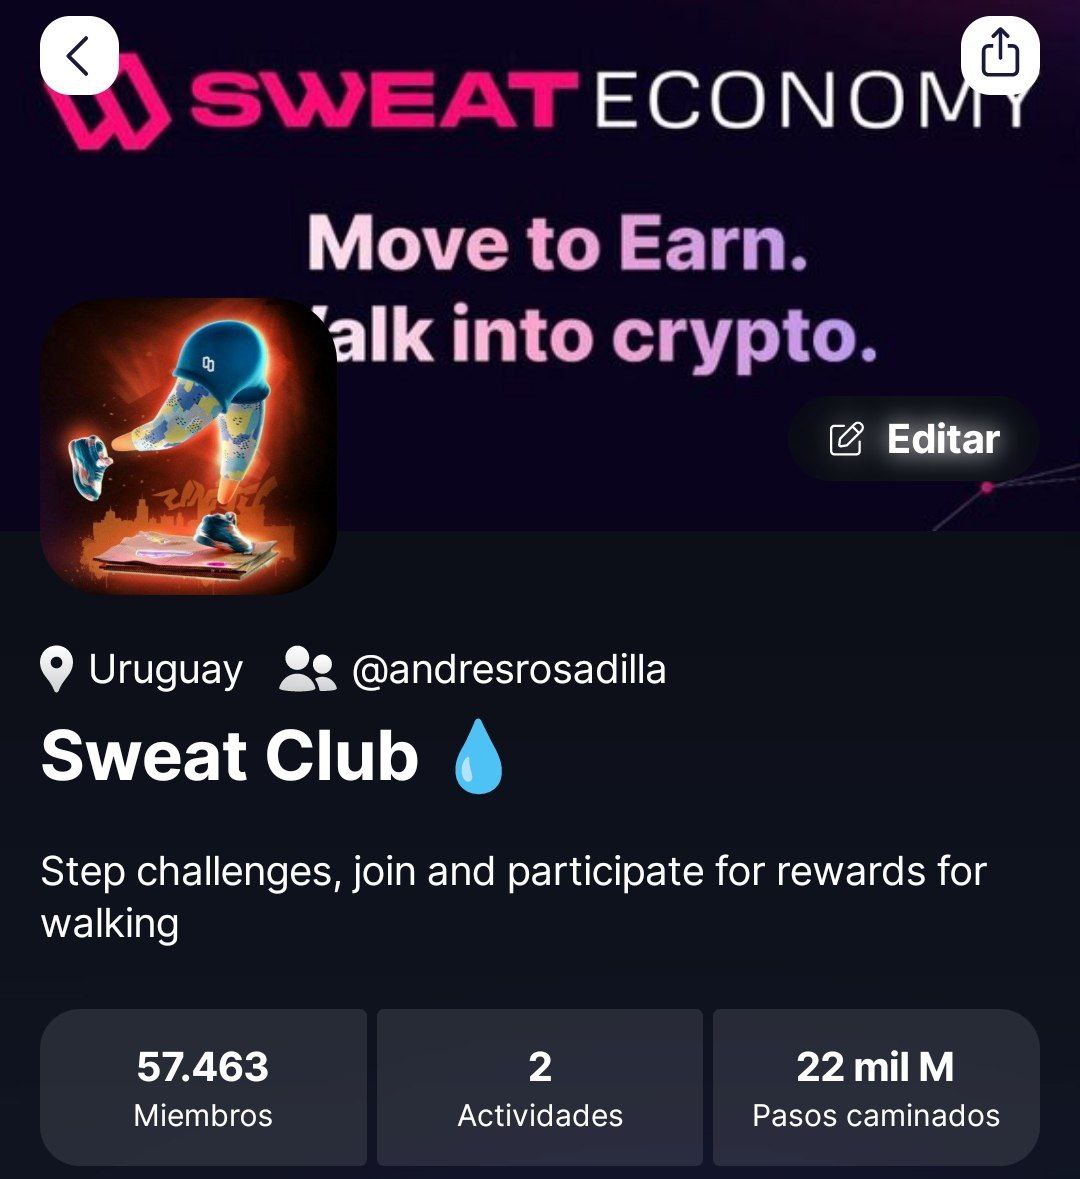 Hey folks, take a look at Sweat Economy's new roadmap, there are some great developments coming this year. Great work by @oleg_fem and the #MovementEconomy team.

Remember to join the #SweatClub 🏃‍♂🏃‍♀️ where you will also find periodic #challenges.
sweatco.in/app/c/sweatclub